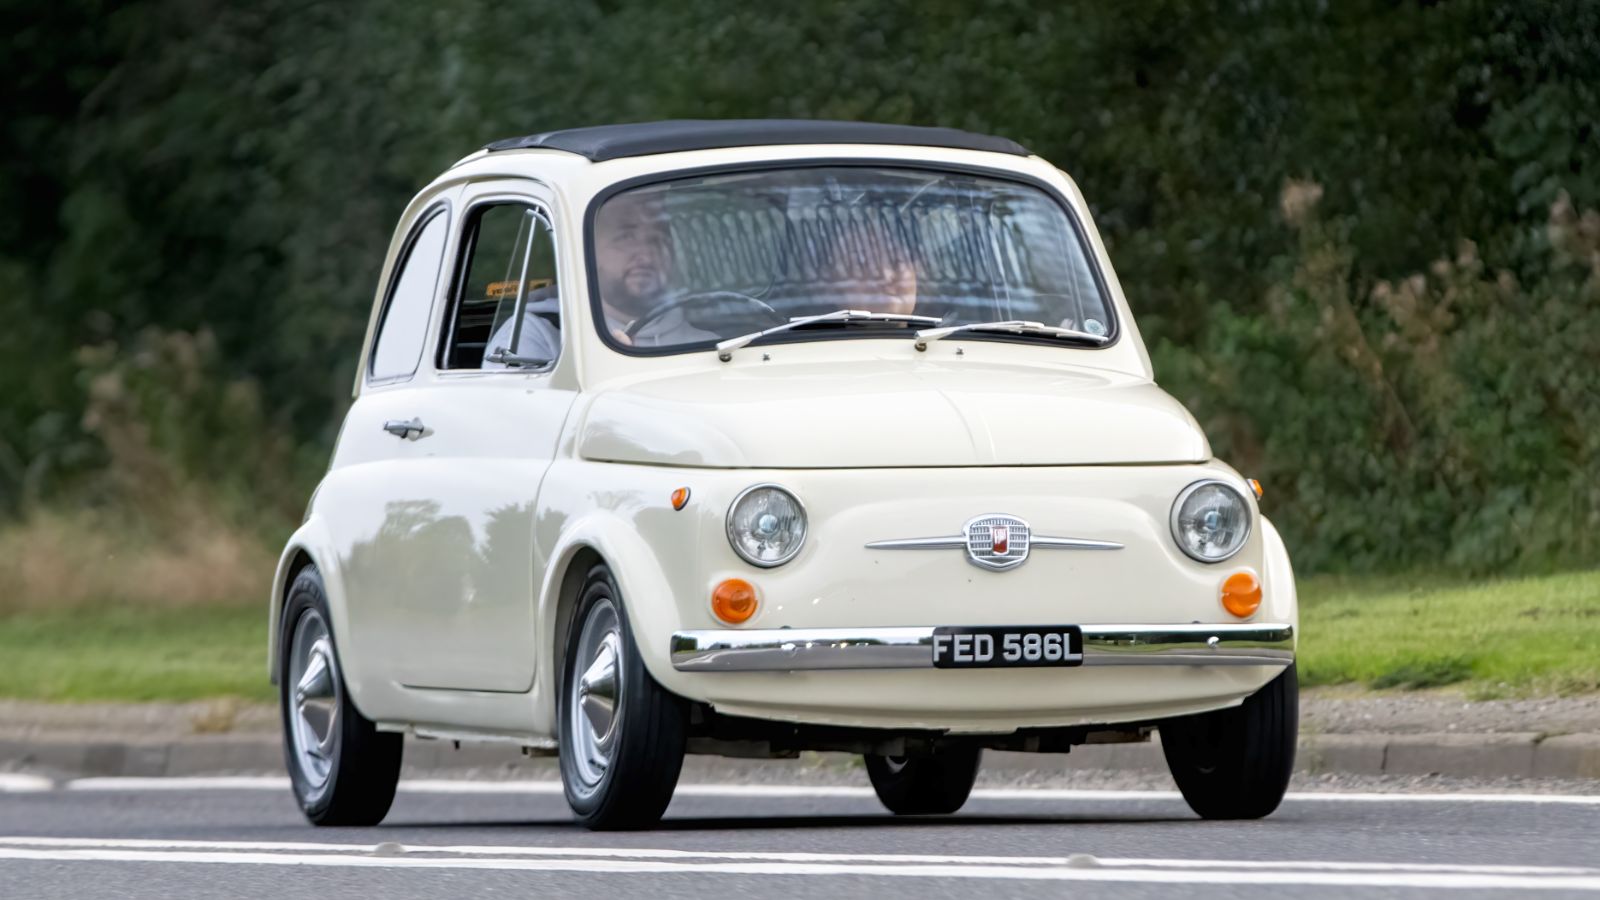 <p>Classic Fiat 500s have small, air-cooled engines prone to overheating, requiring regular tuning. These cars are especially vulnerable to rust in wet climates, with it often appearing in hard-to-spot places. While many spare parts are surprisingly affordable, some specific components for restoration are expensive.</p>